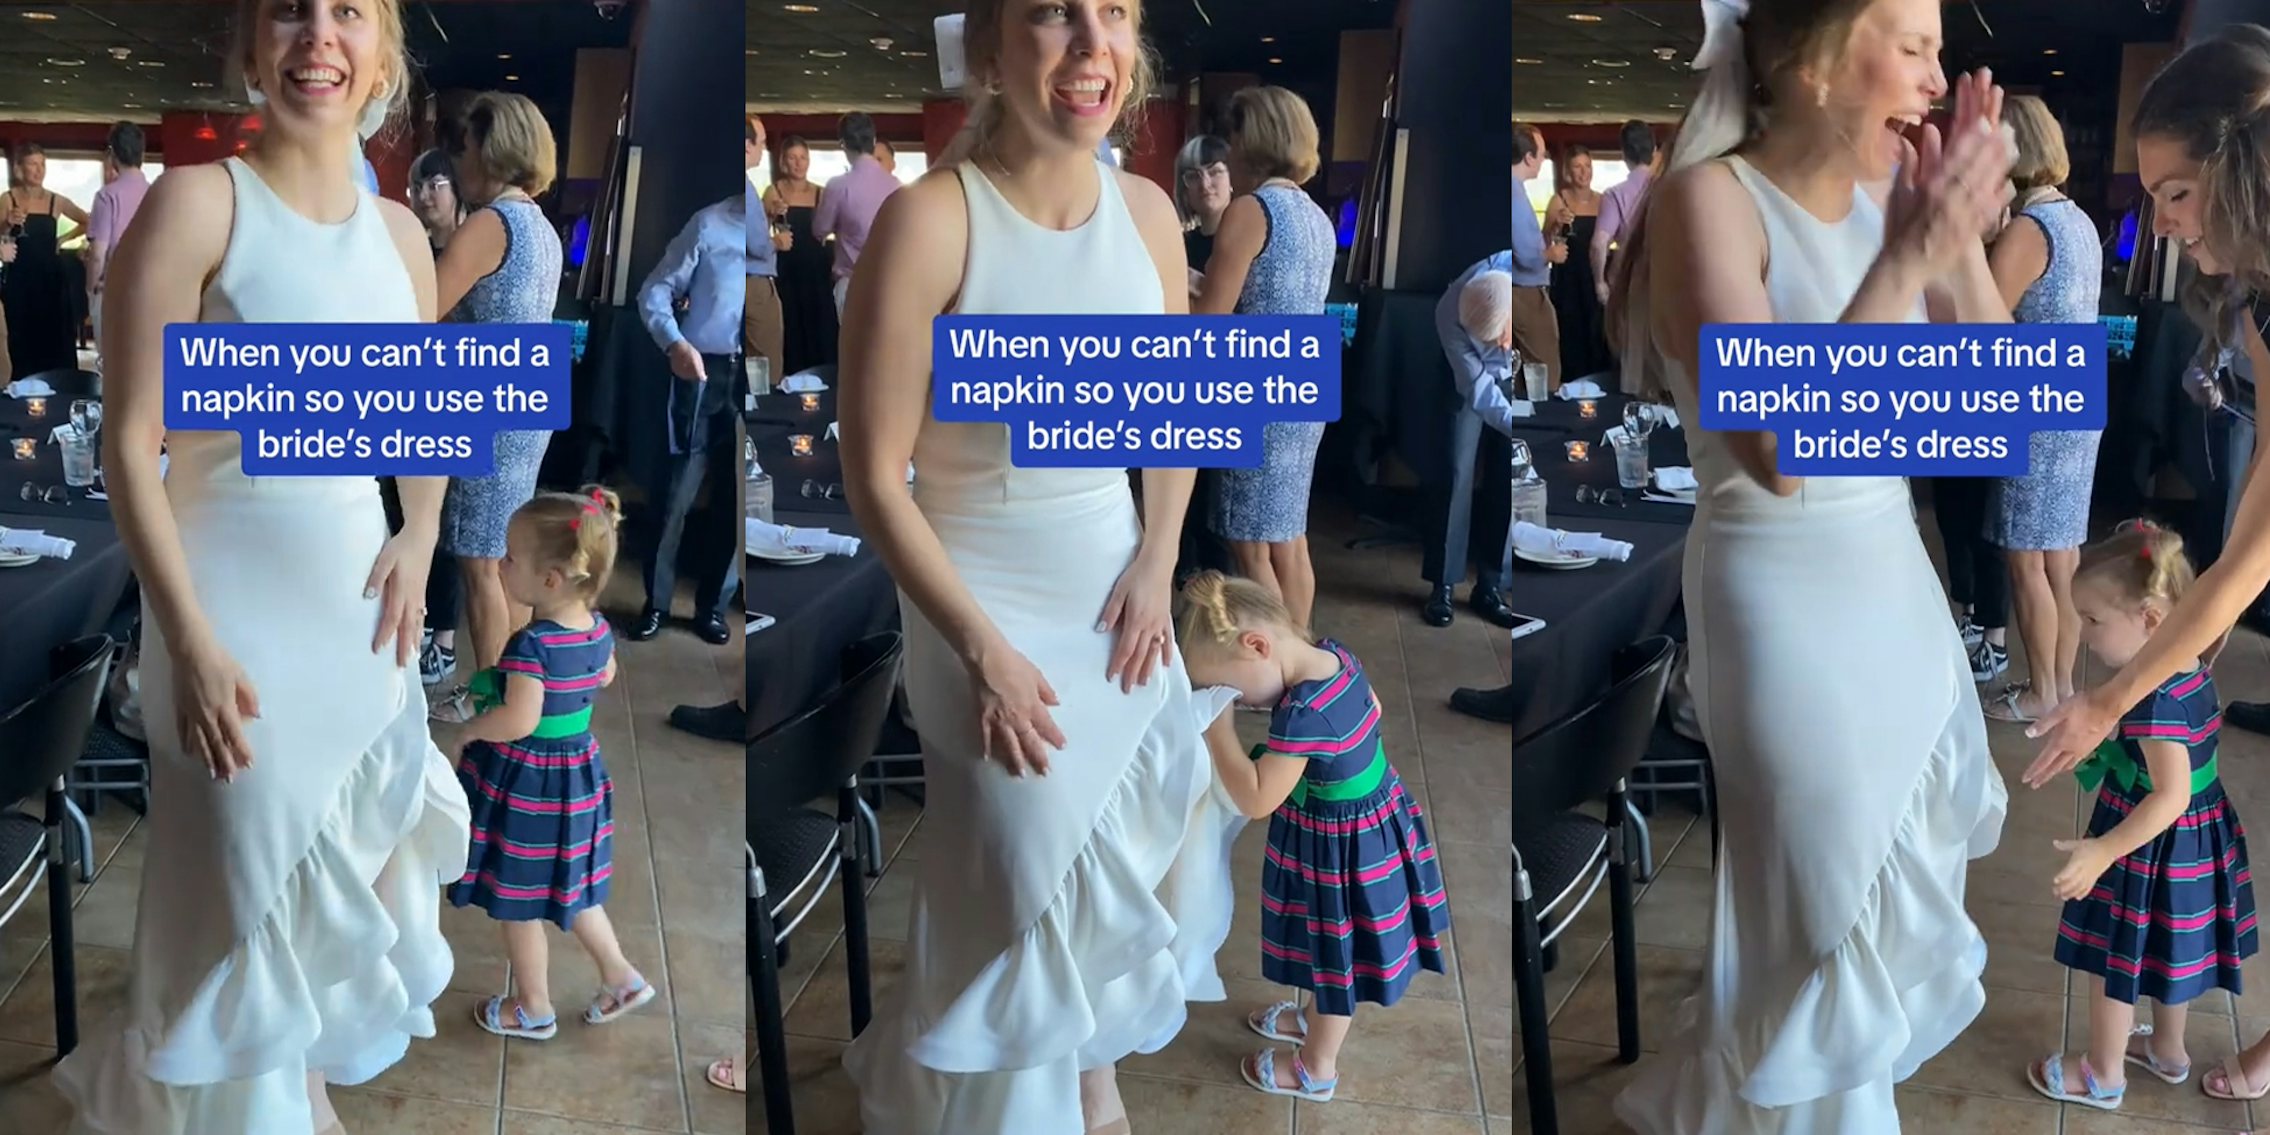 Child uses bride's wedding dress as a tissue